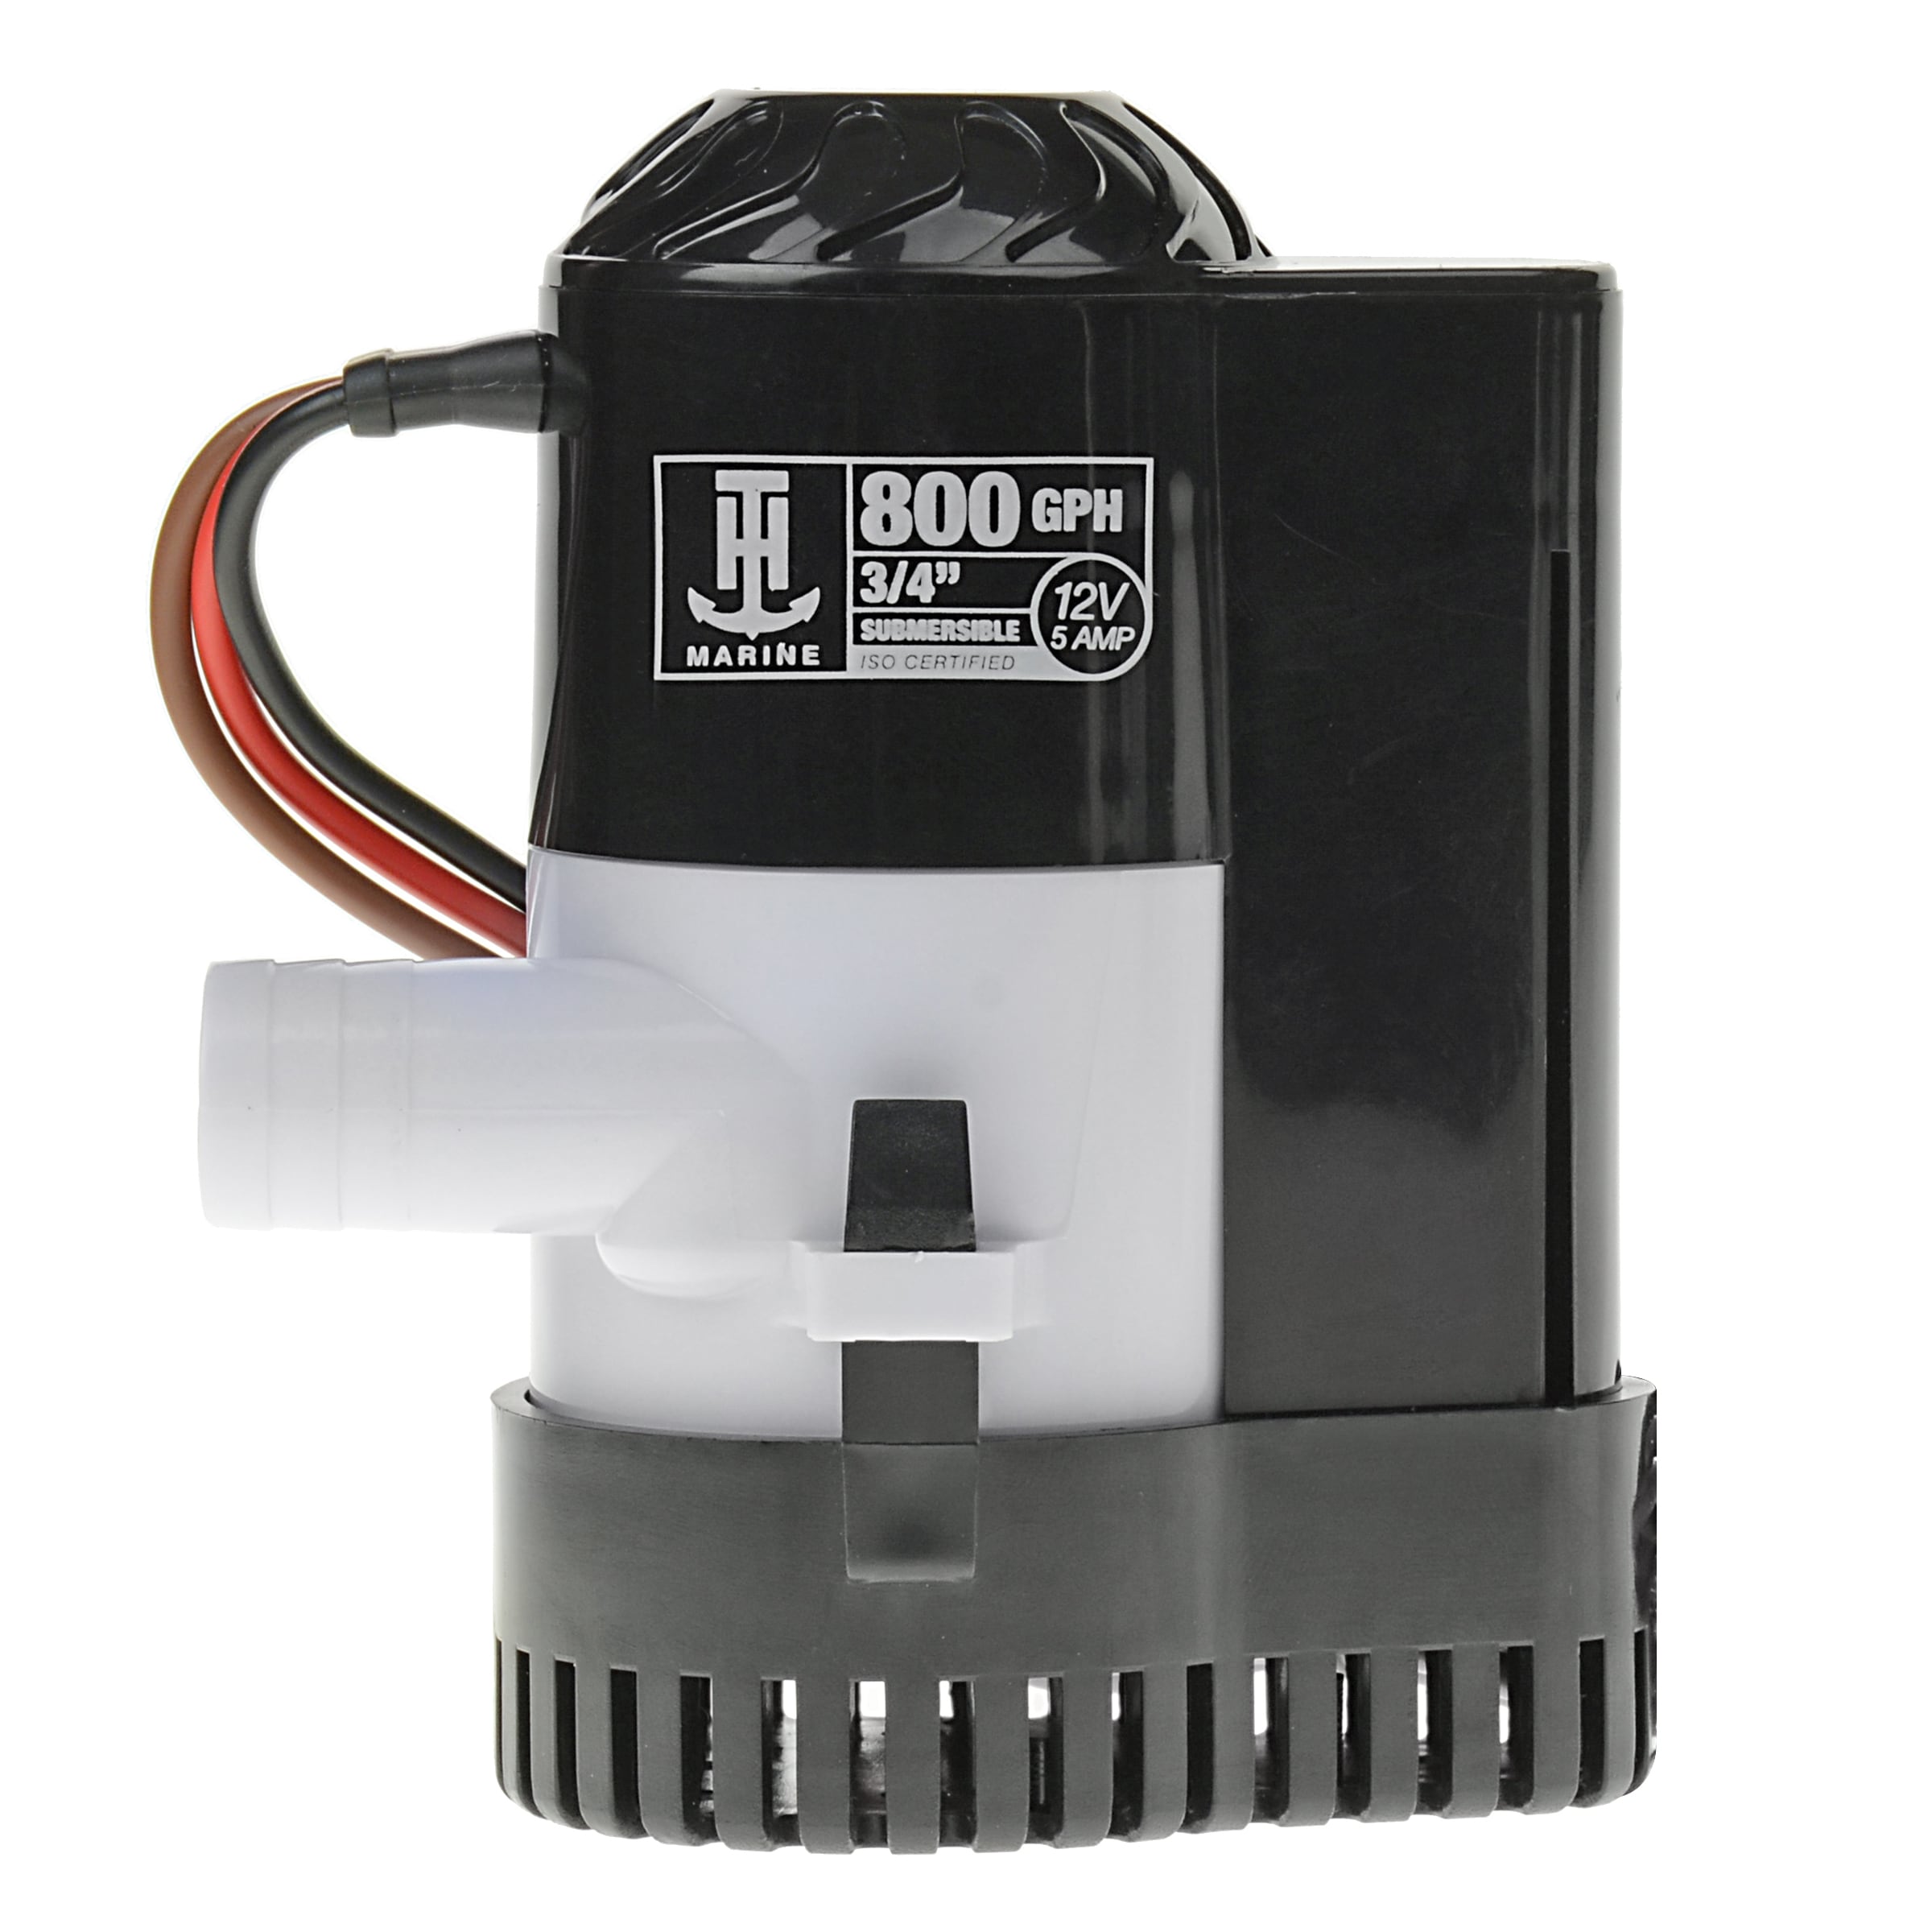 T-H Marine 800 Gph Automatic Bilge Pump - Plastic - Bilge Pump - 12V -  Snap-in Base - Easy Installation in the Boat Pumps, Parts & Accessories  department at